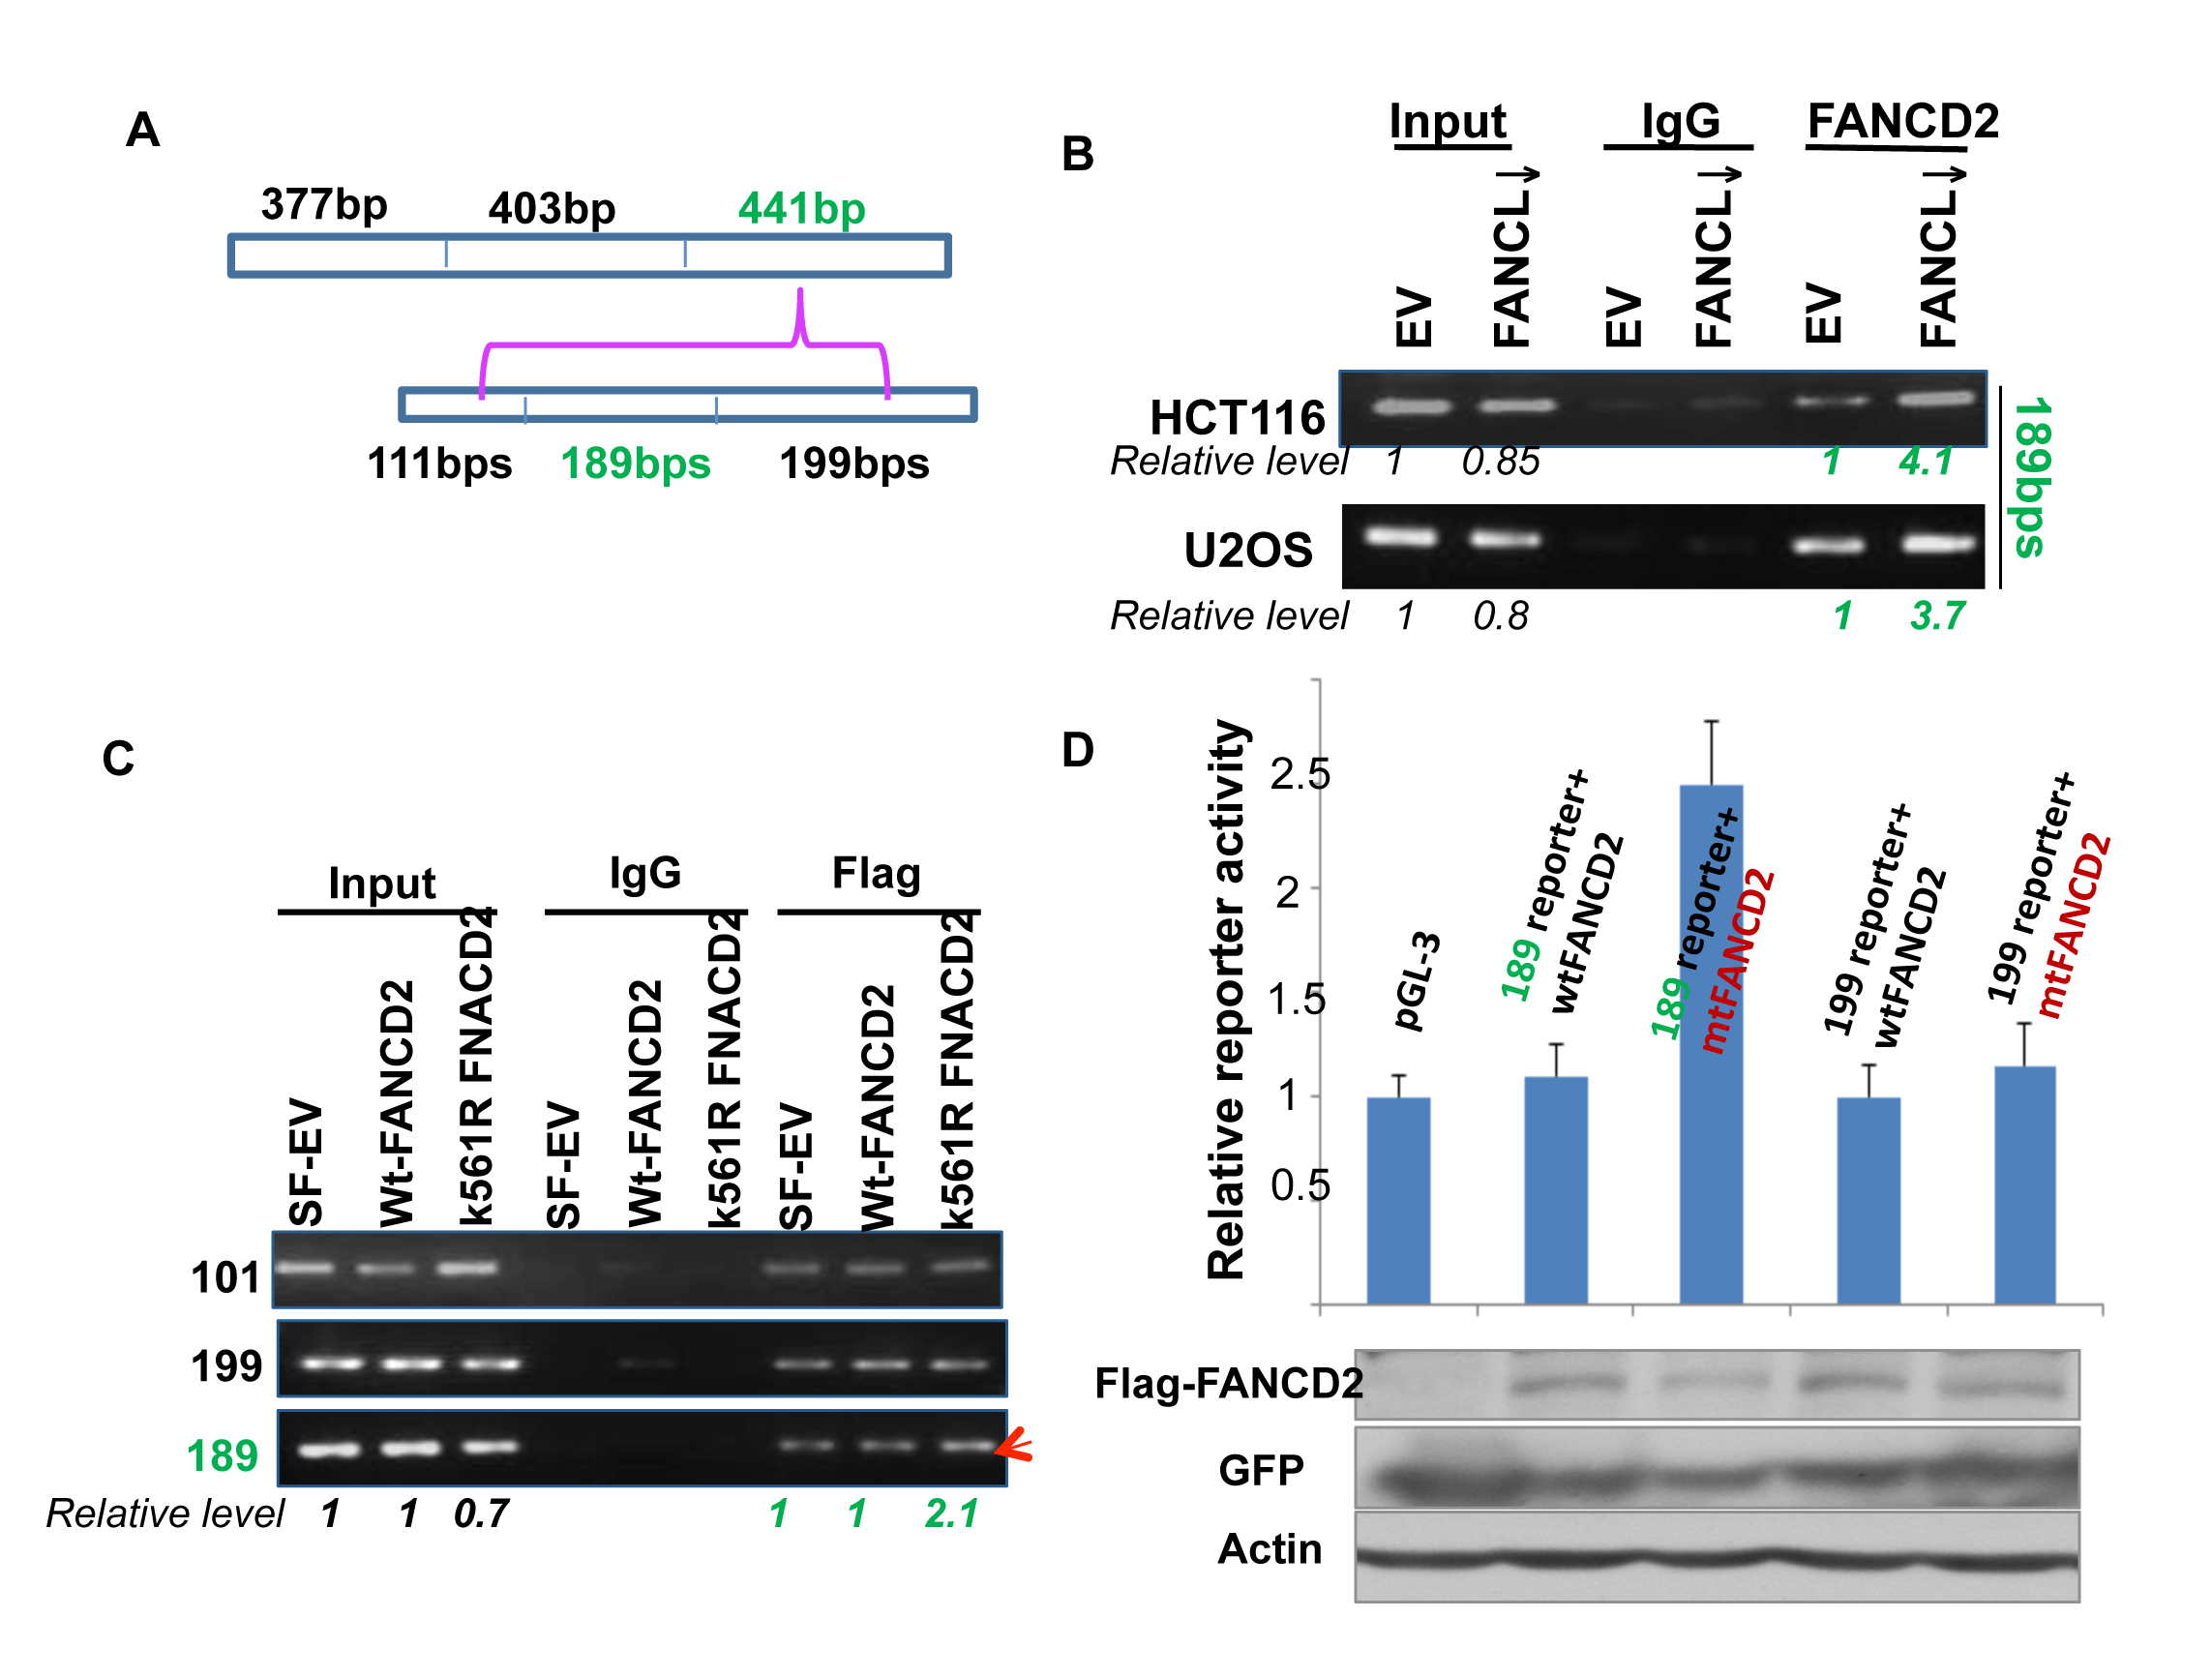 A 189bp DNA sequence within the 441 bp segment can mediate the regulation of &#x2206;Np63 expression by mtFANCD2.